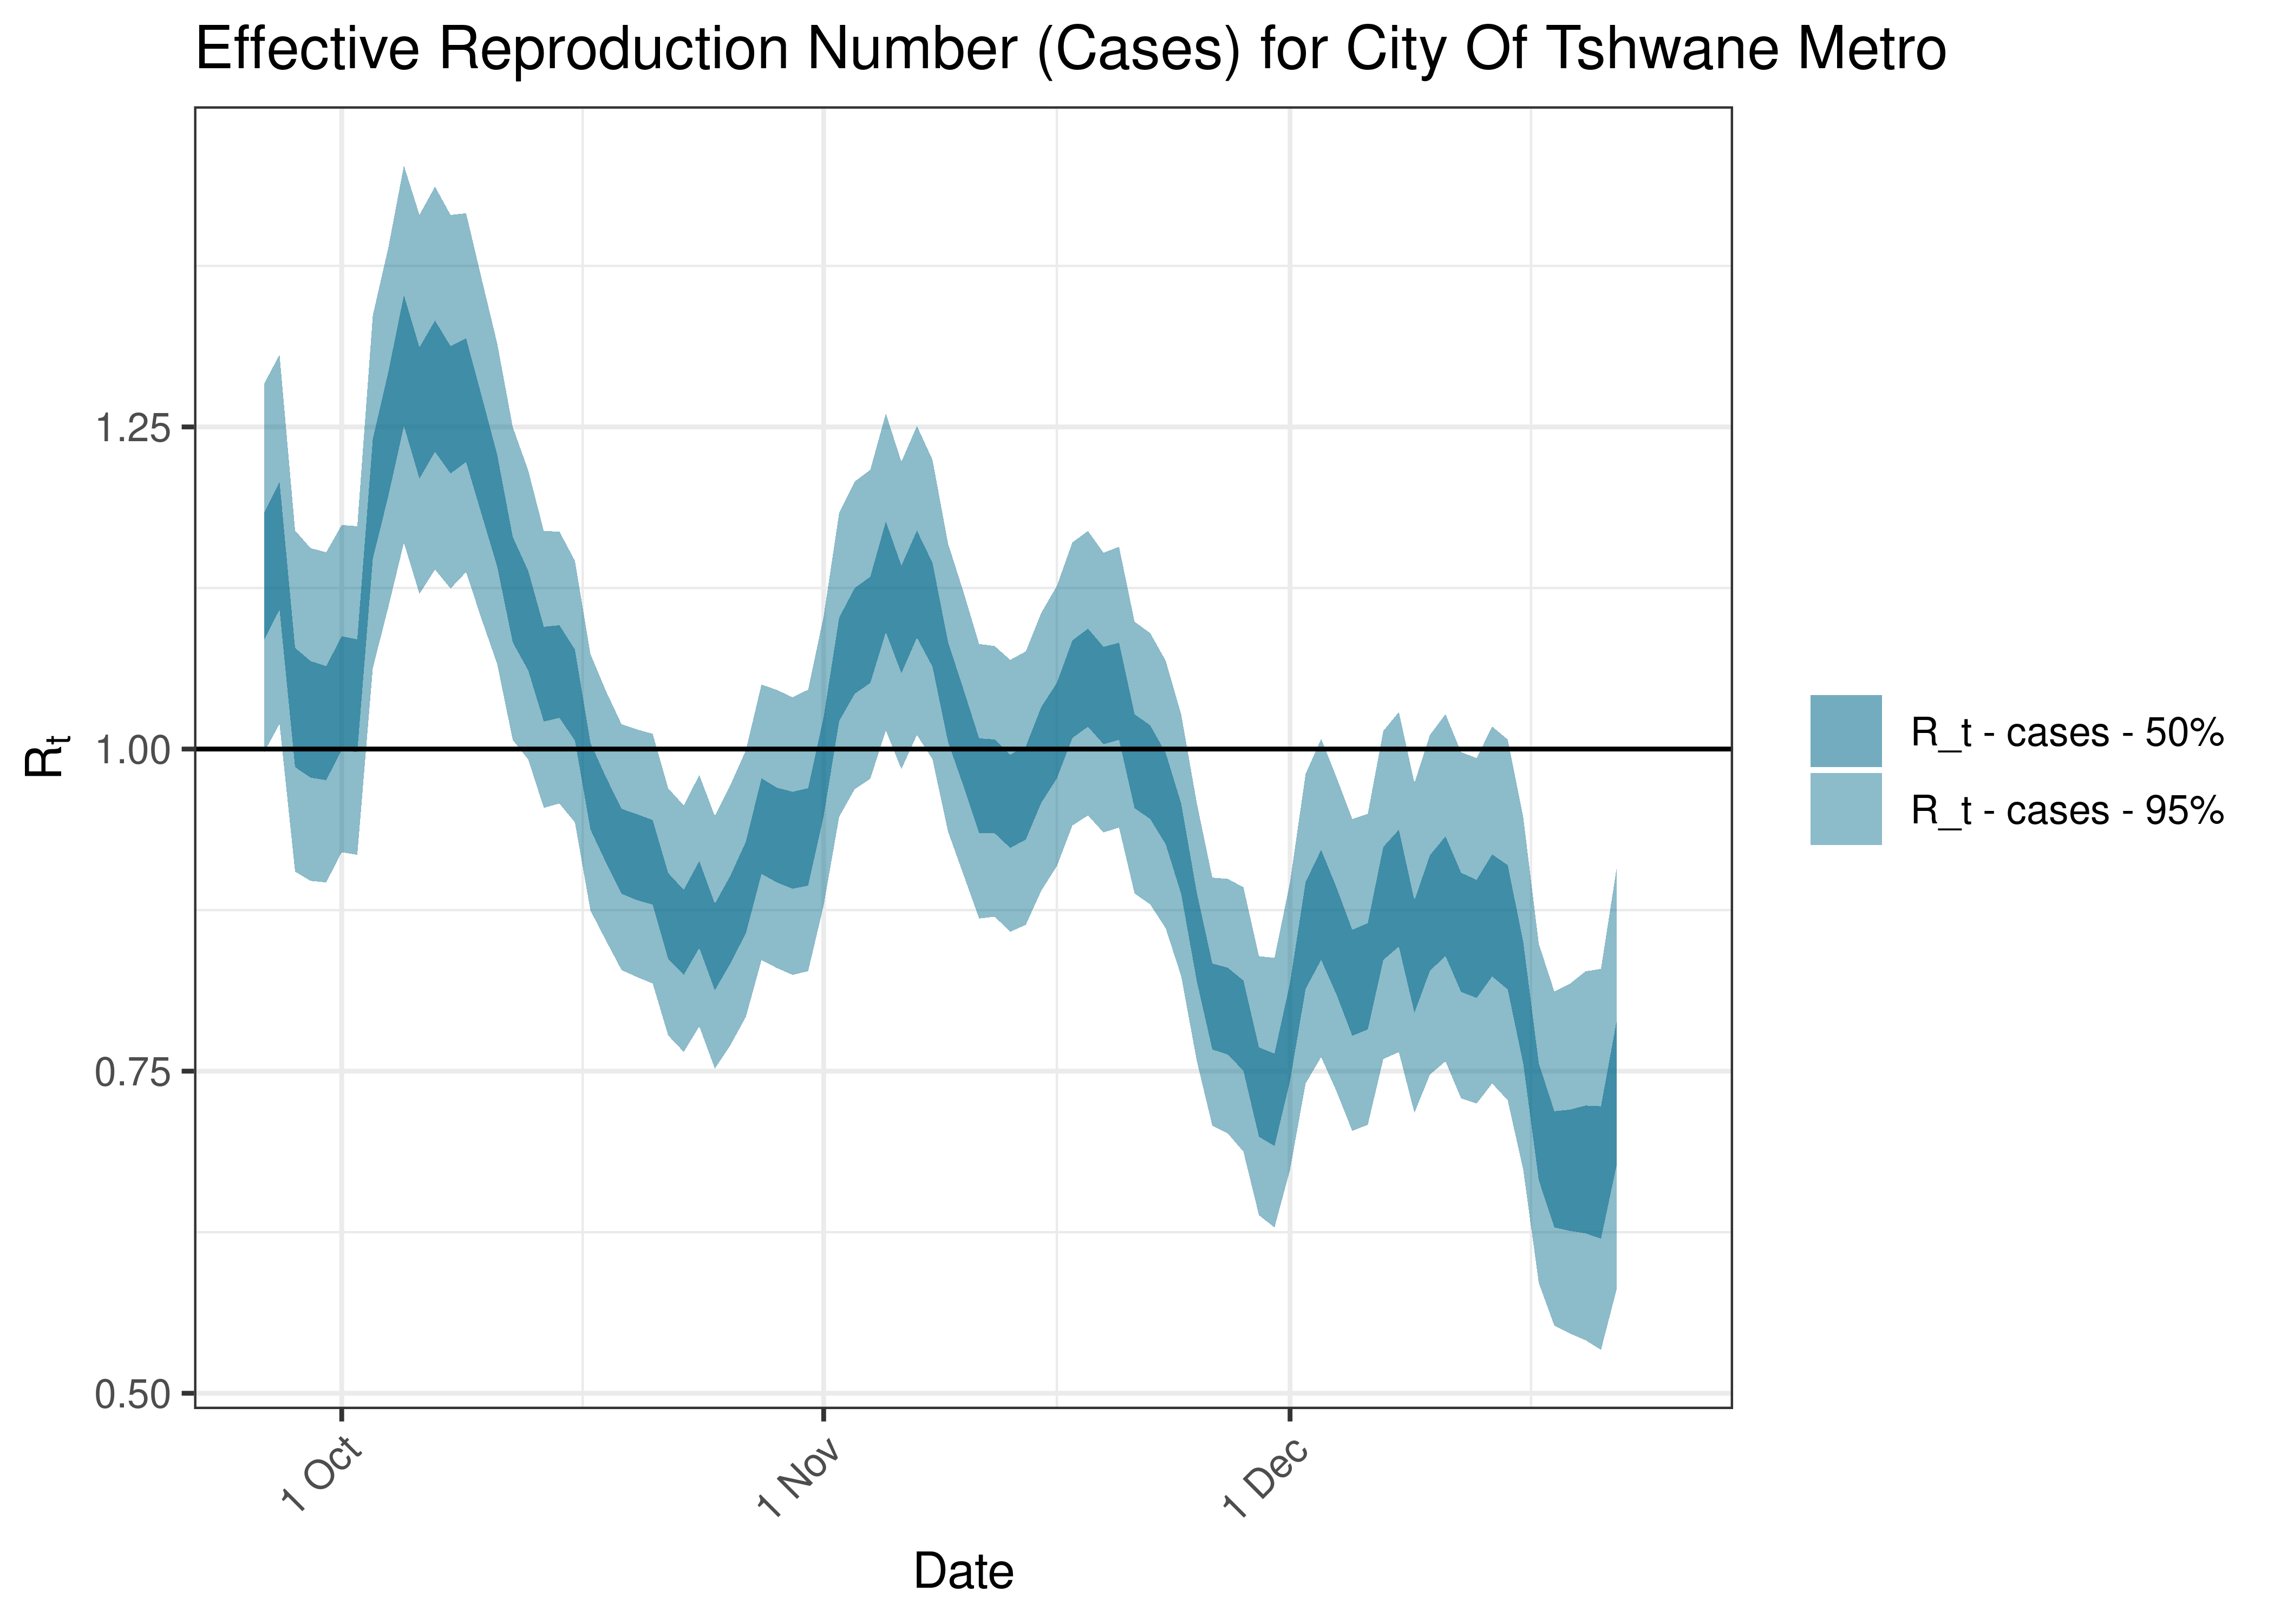 Estimated Effective Reproduction Number Based on Cases for City Of Tshwane Metro over last 90 days